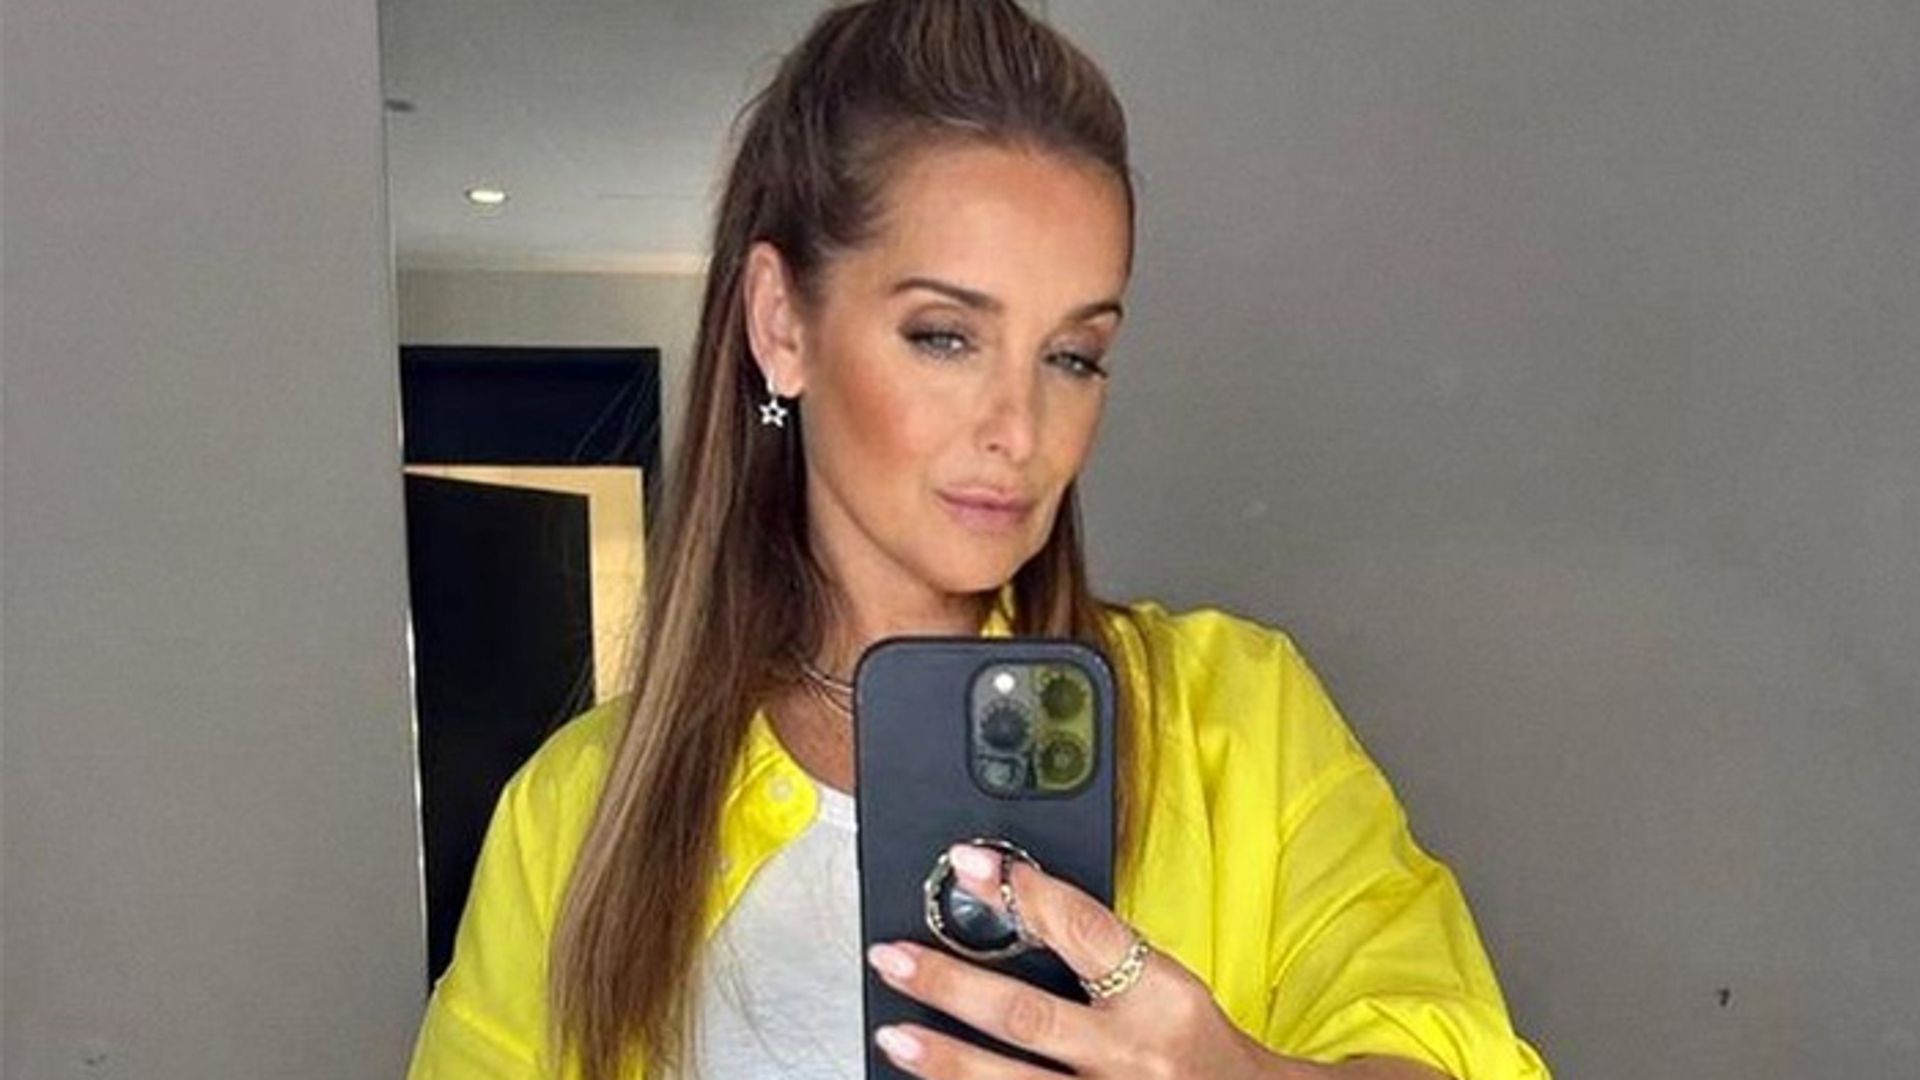 Louise Redknapp stuns in figure-flattering jeans and chic top for very special outing